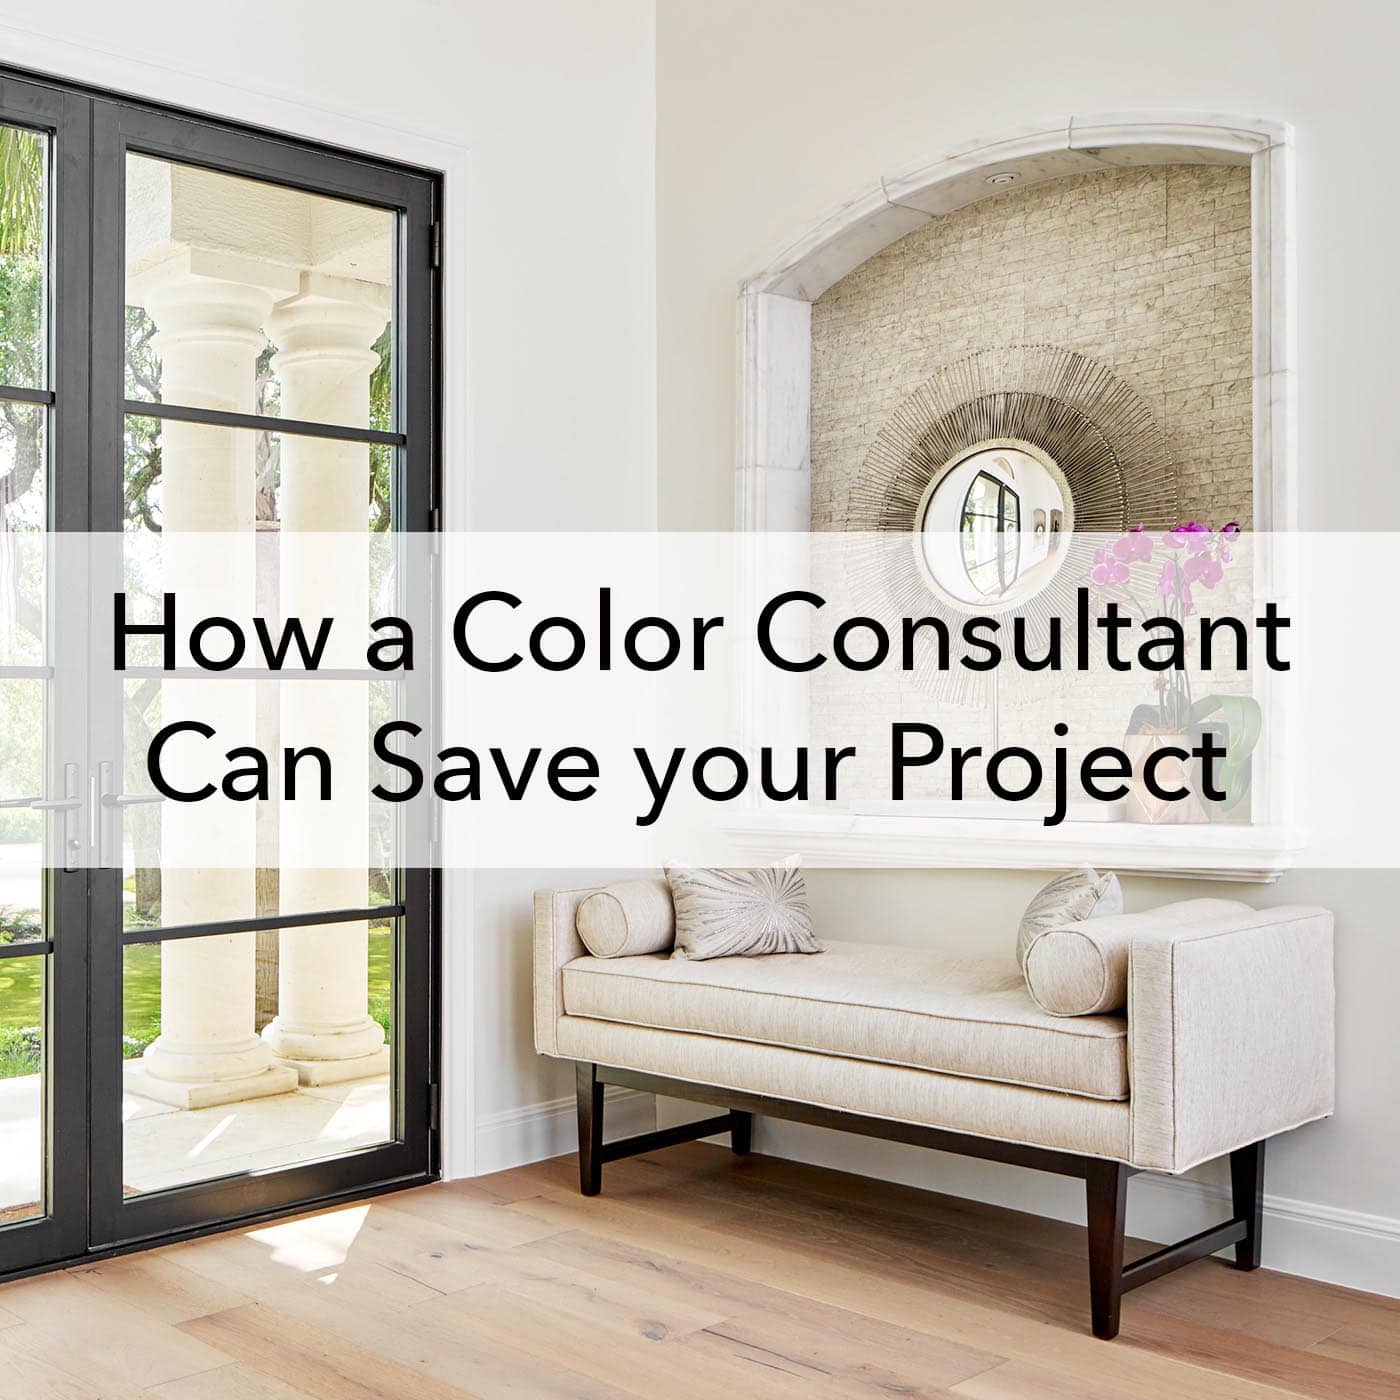 How a Color Consultant can save your project, blog